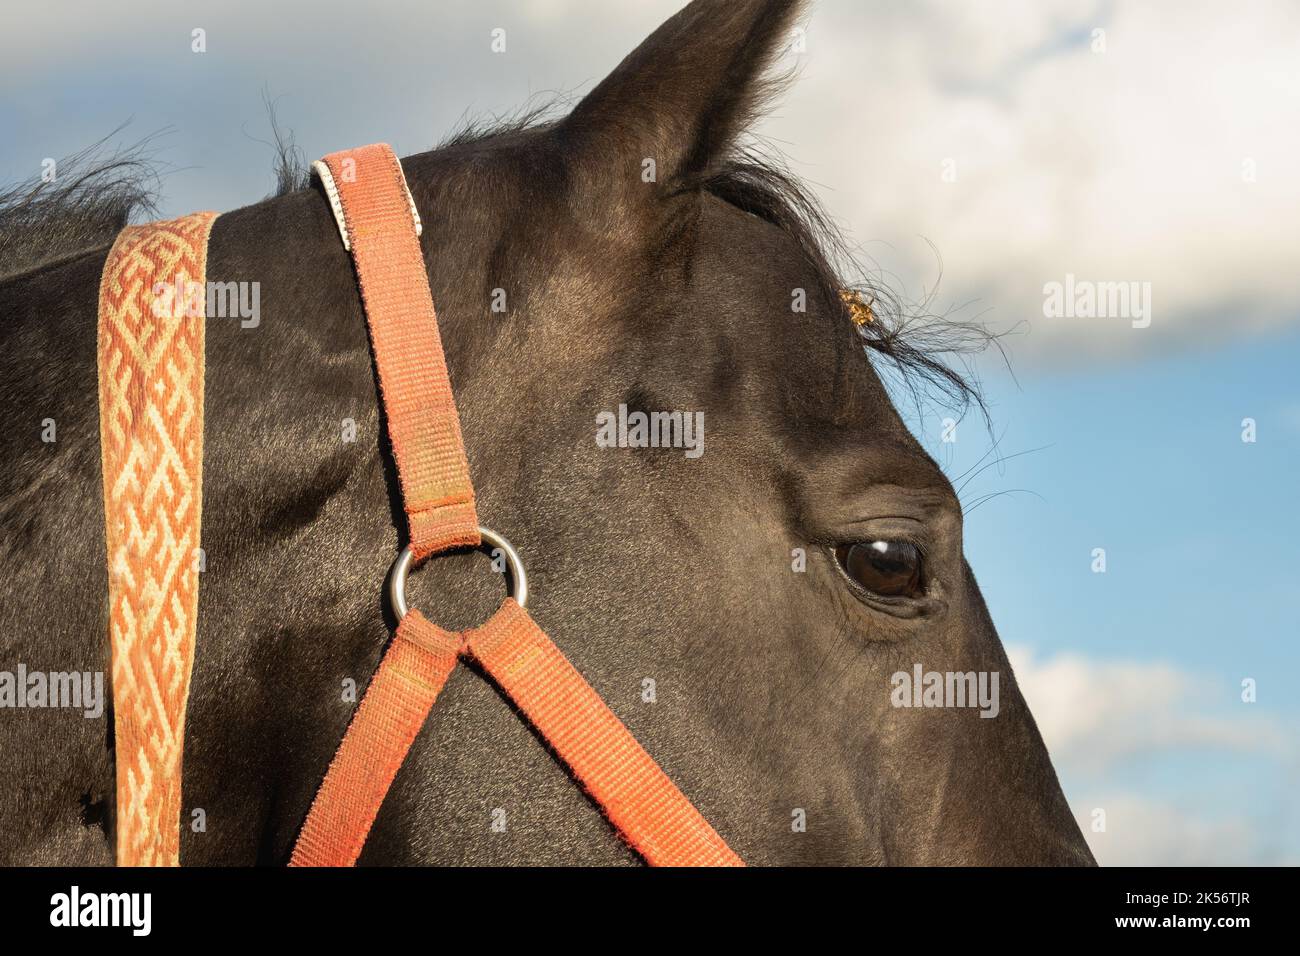 Close-up of the head of a bay horse with a bridle. Stock Photo